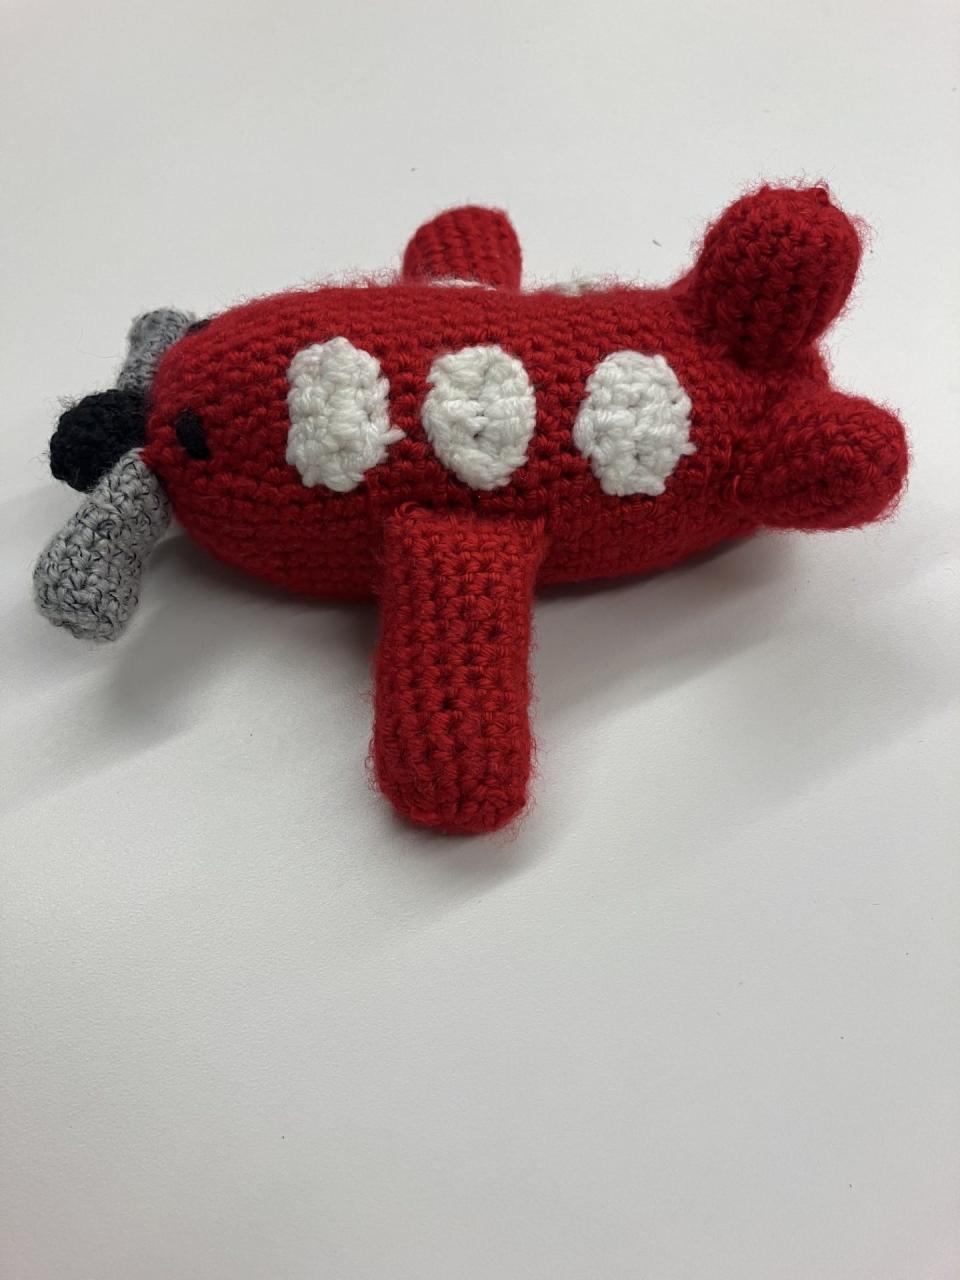 Laura Jones crocheted an airplane for her sister Jessica Cooper years before she was found dead in downtown Indianapolis on Dec. 28, 2023.